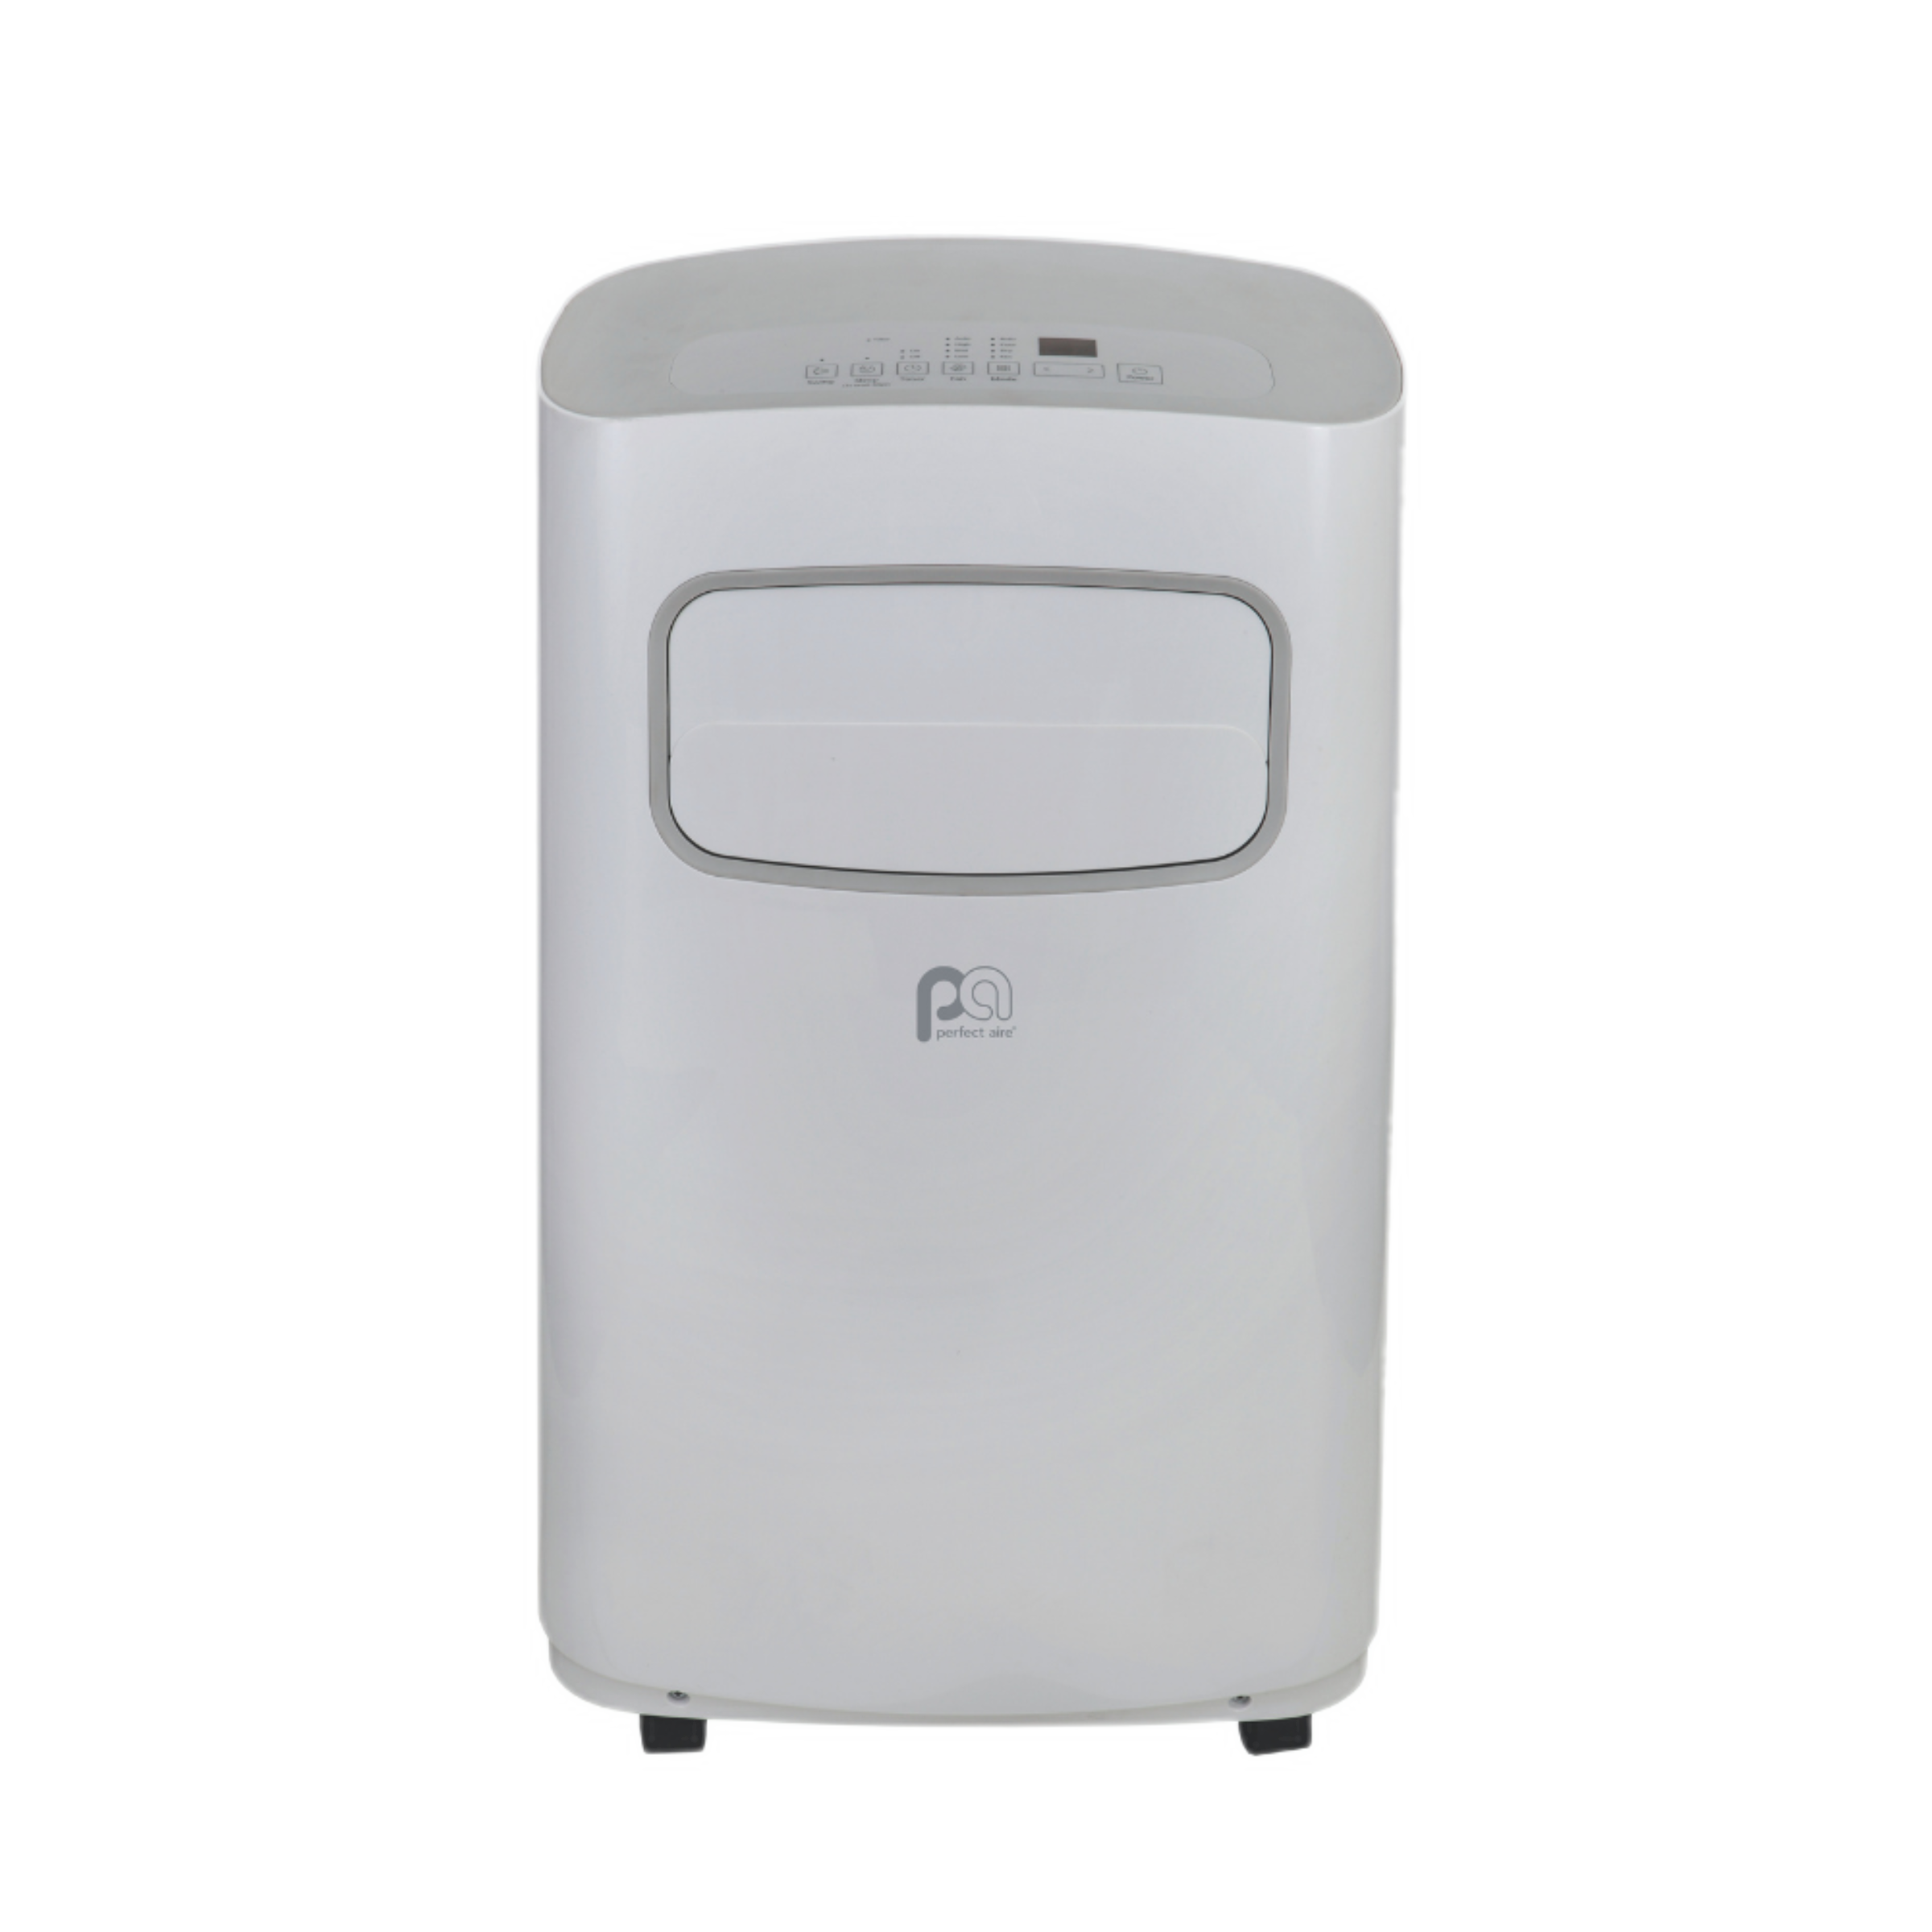 2PORT12000 Perfect Aire 12,000 BTU Compact Portable Air Conditioner - CEC, Sq. ft: 450-550 Coverage, With Remote Control, Non-Ozone Depleting R32 Refrigerant, EER = 8.9